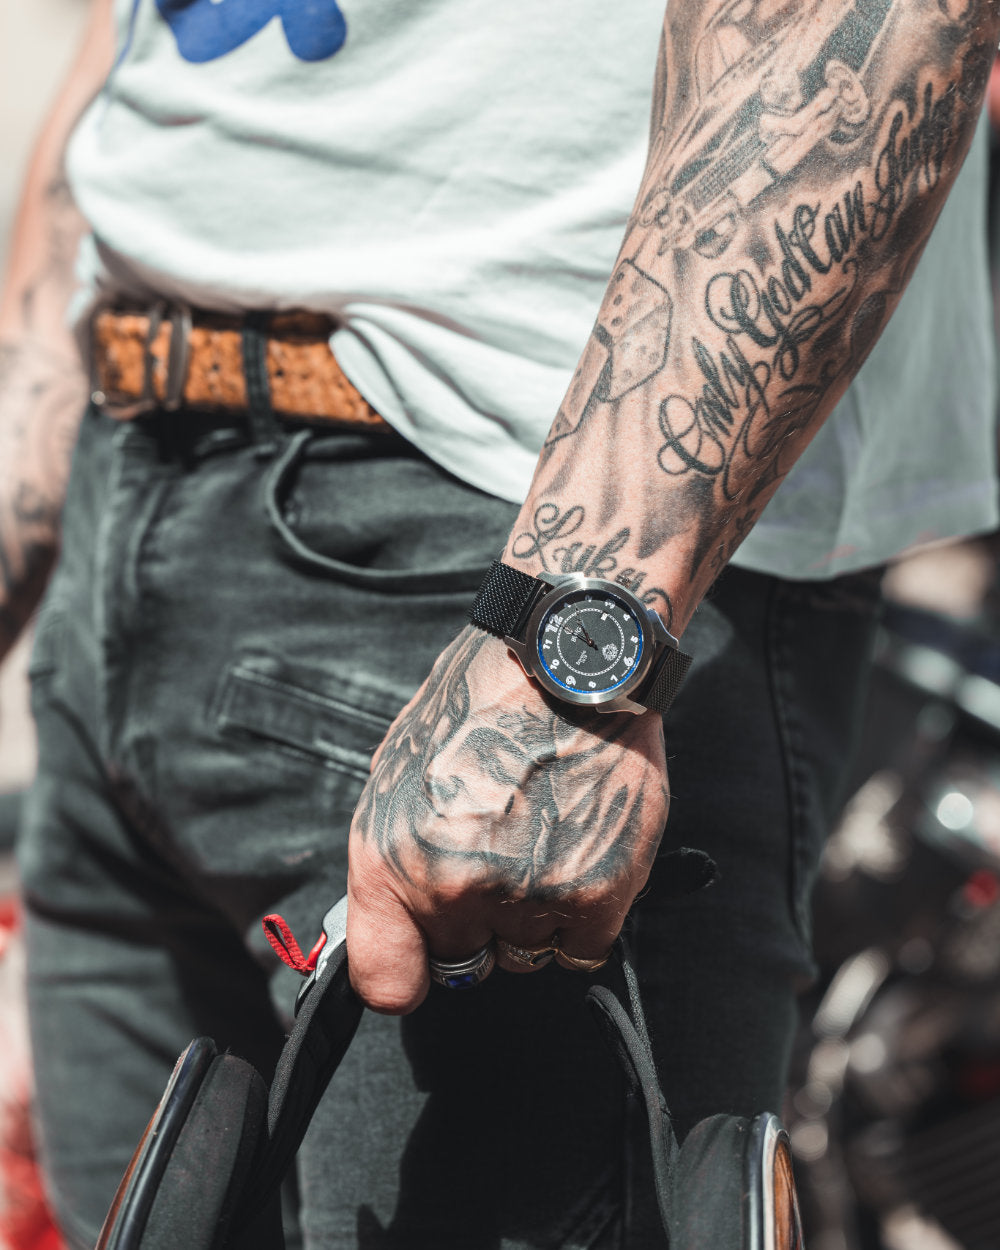 Man with tattooed hand wears a BWG Bavarian watch BAVARIA GOOD Design awarded Premium Quartz Watch with Swiss Ronda Movement driving a motor-cycle